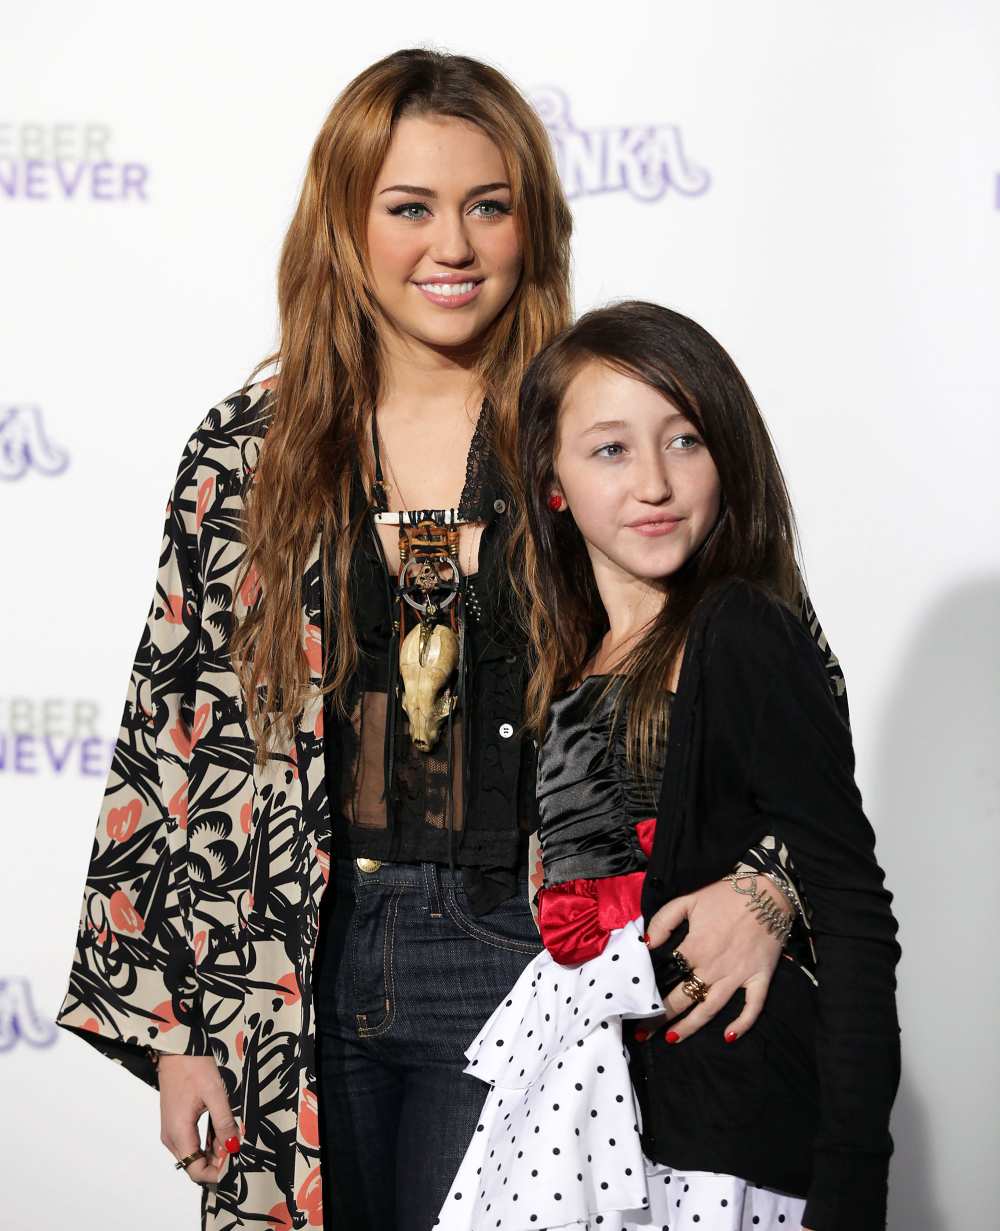 Noah Cyrus Says Growing Up as Miley Cyrus’ Sister Was ‘Unbearable’